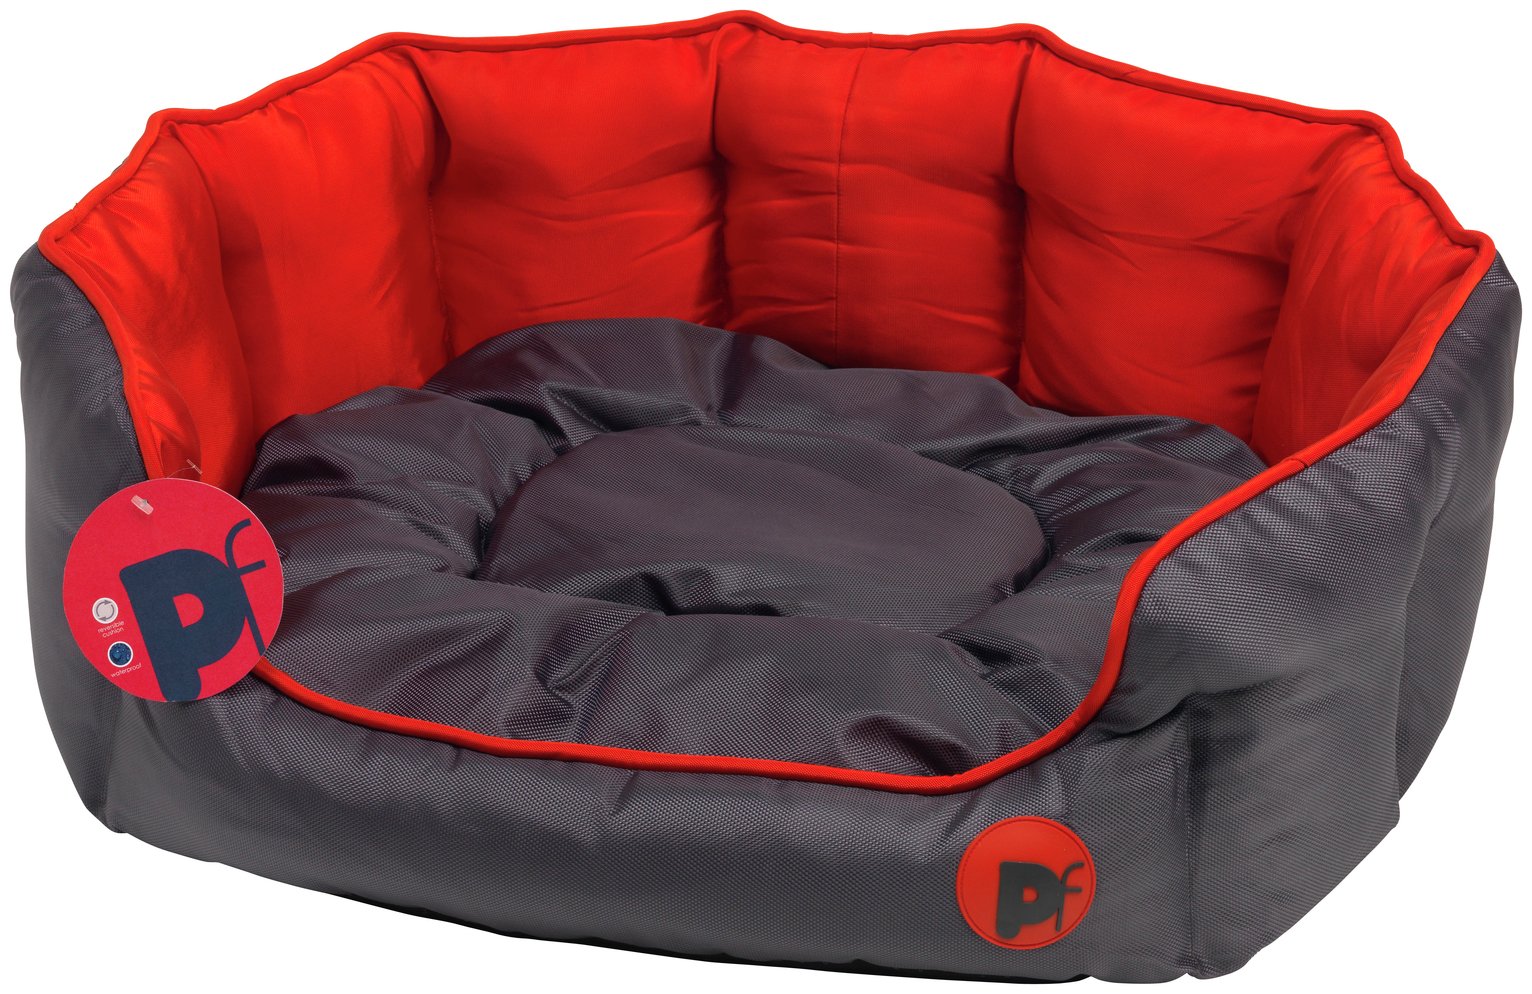 Petface Oxford Red Dog Bed review